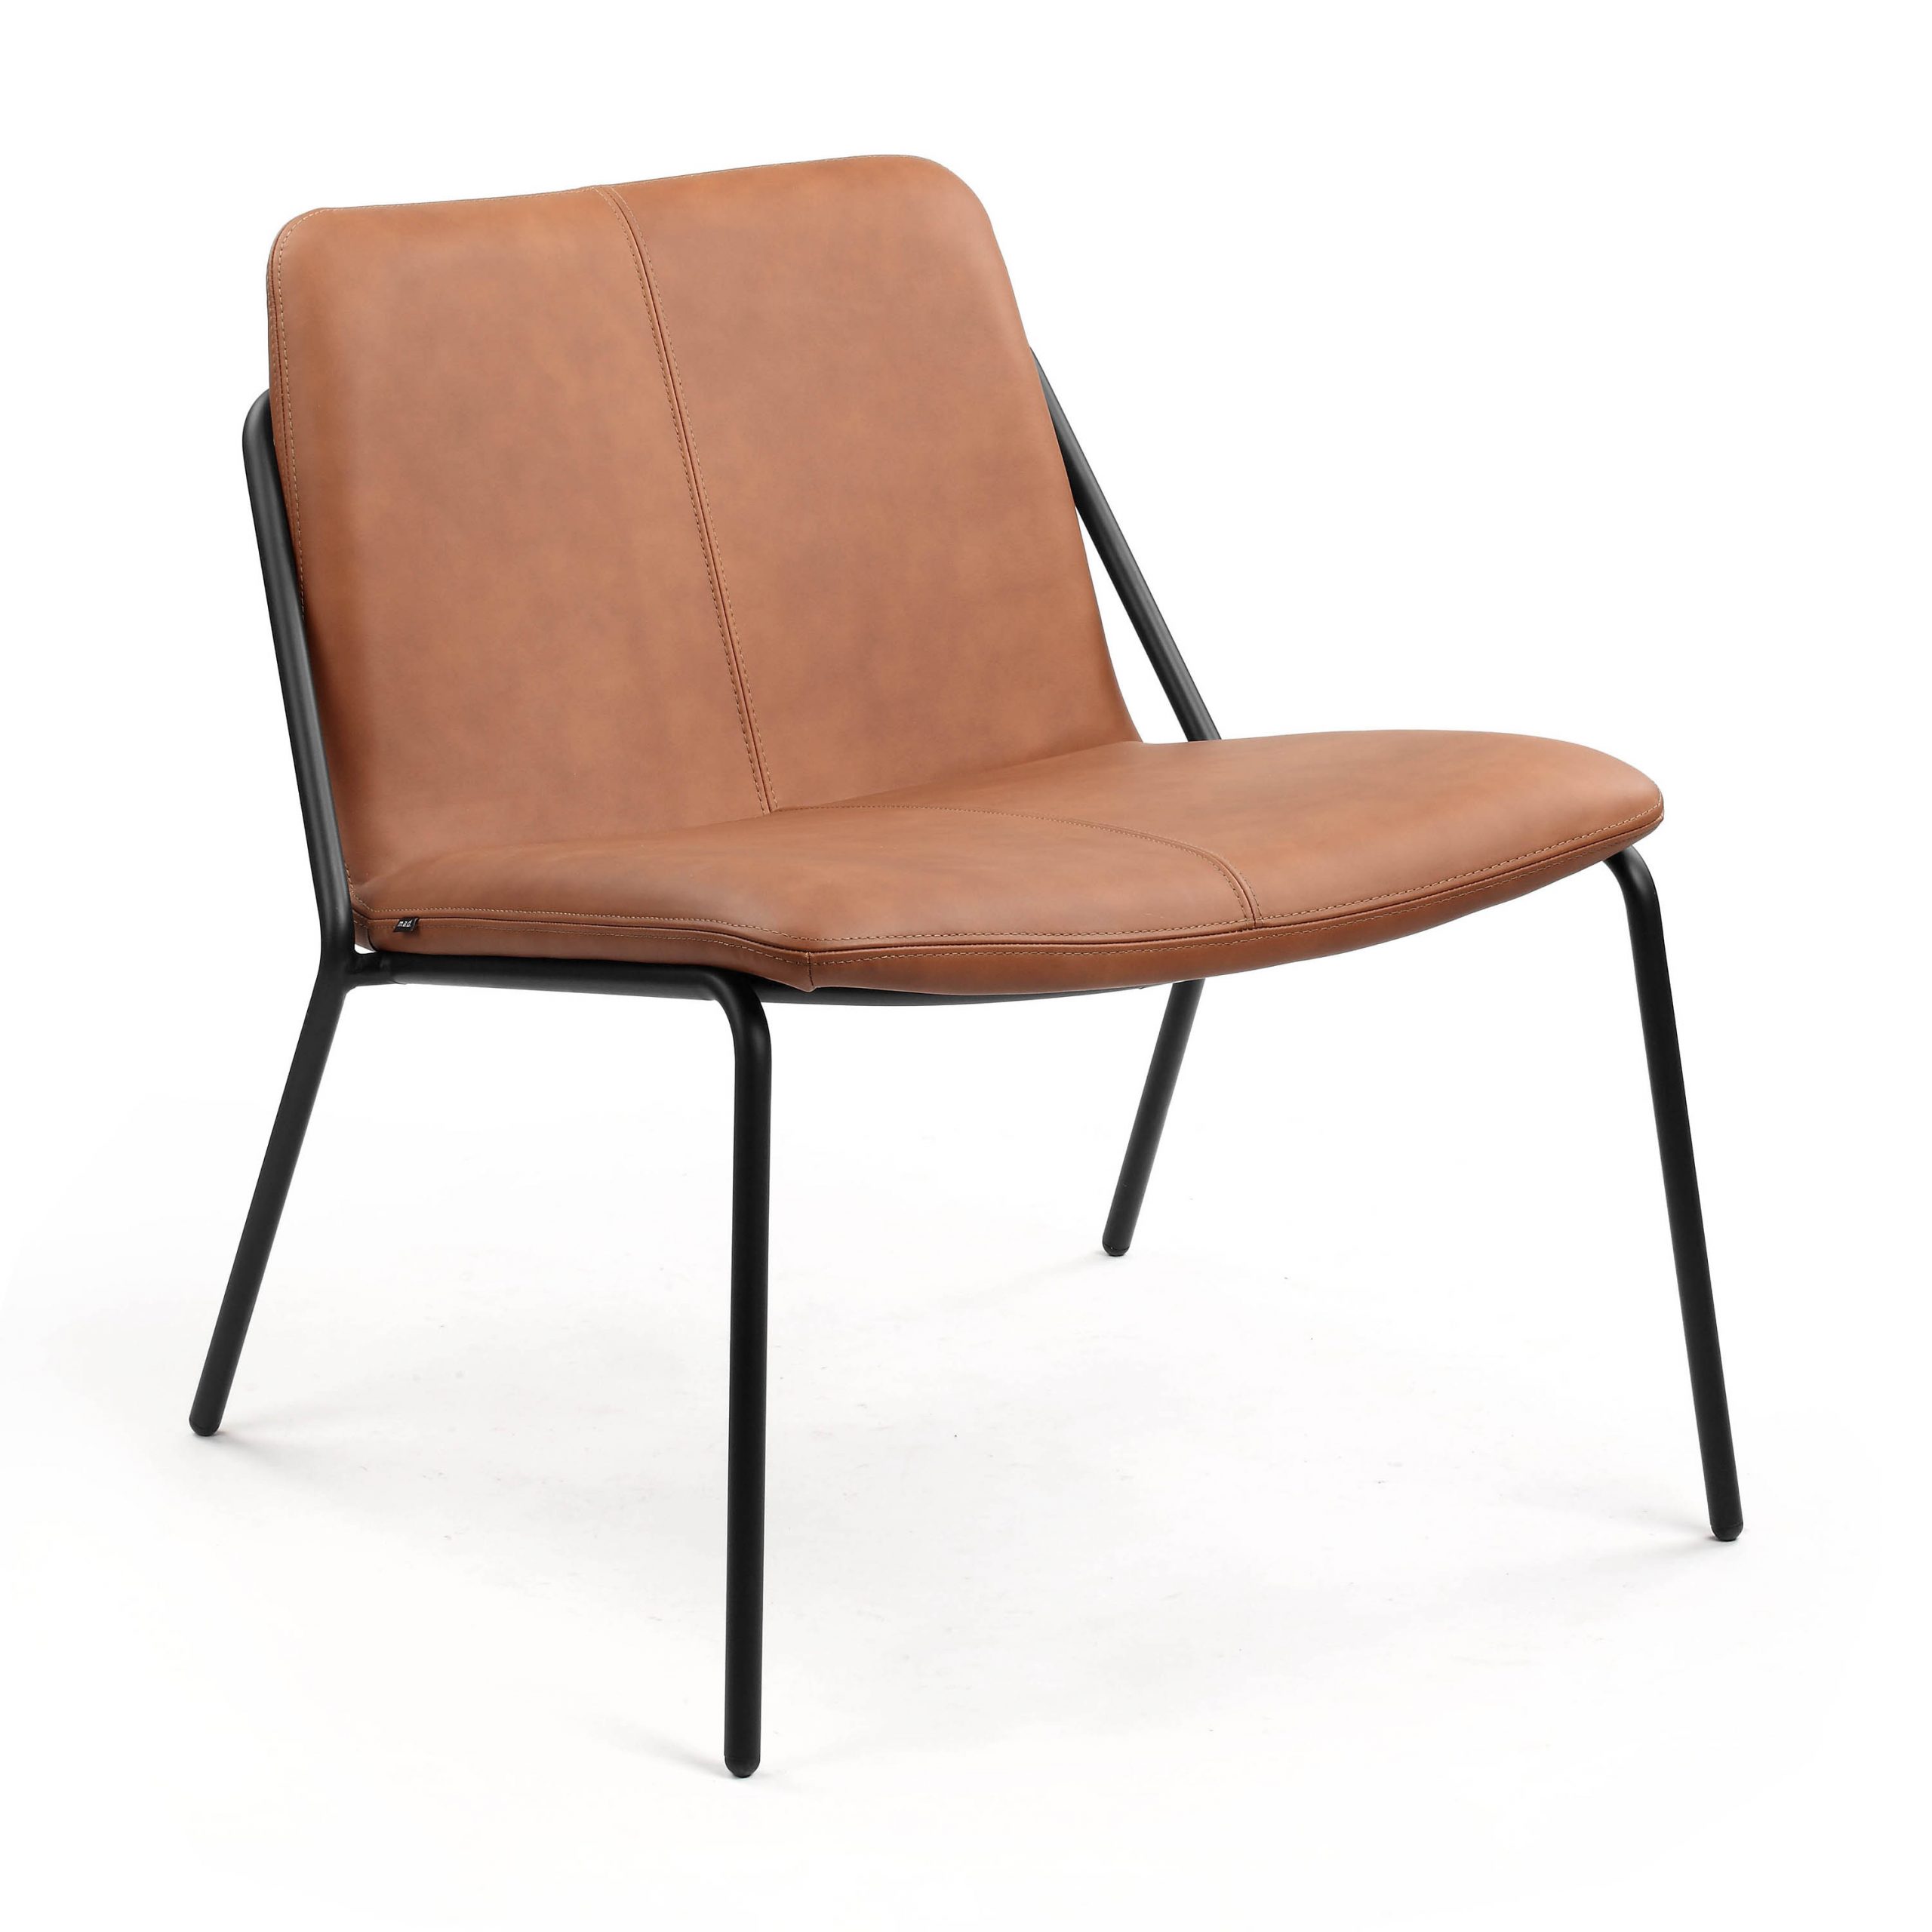 Commune Leather Sling Chair